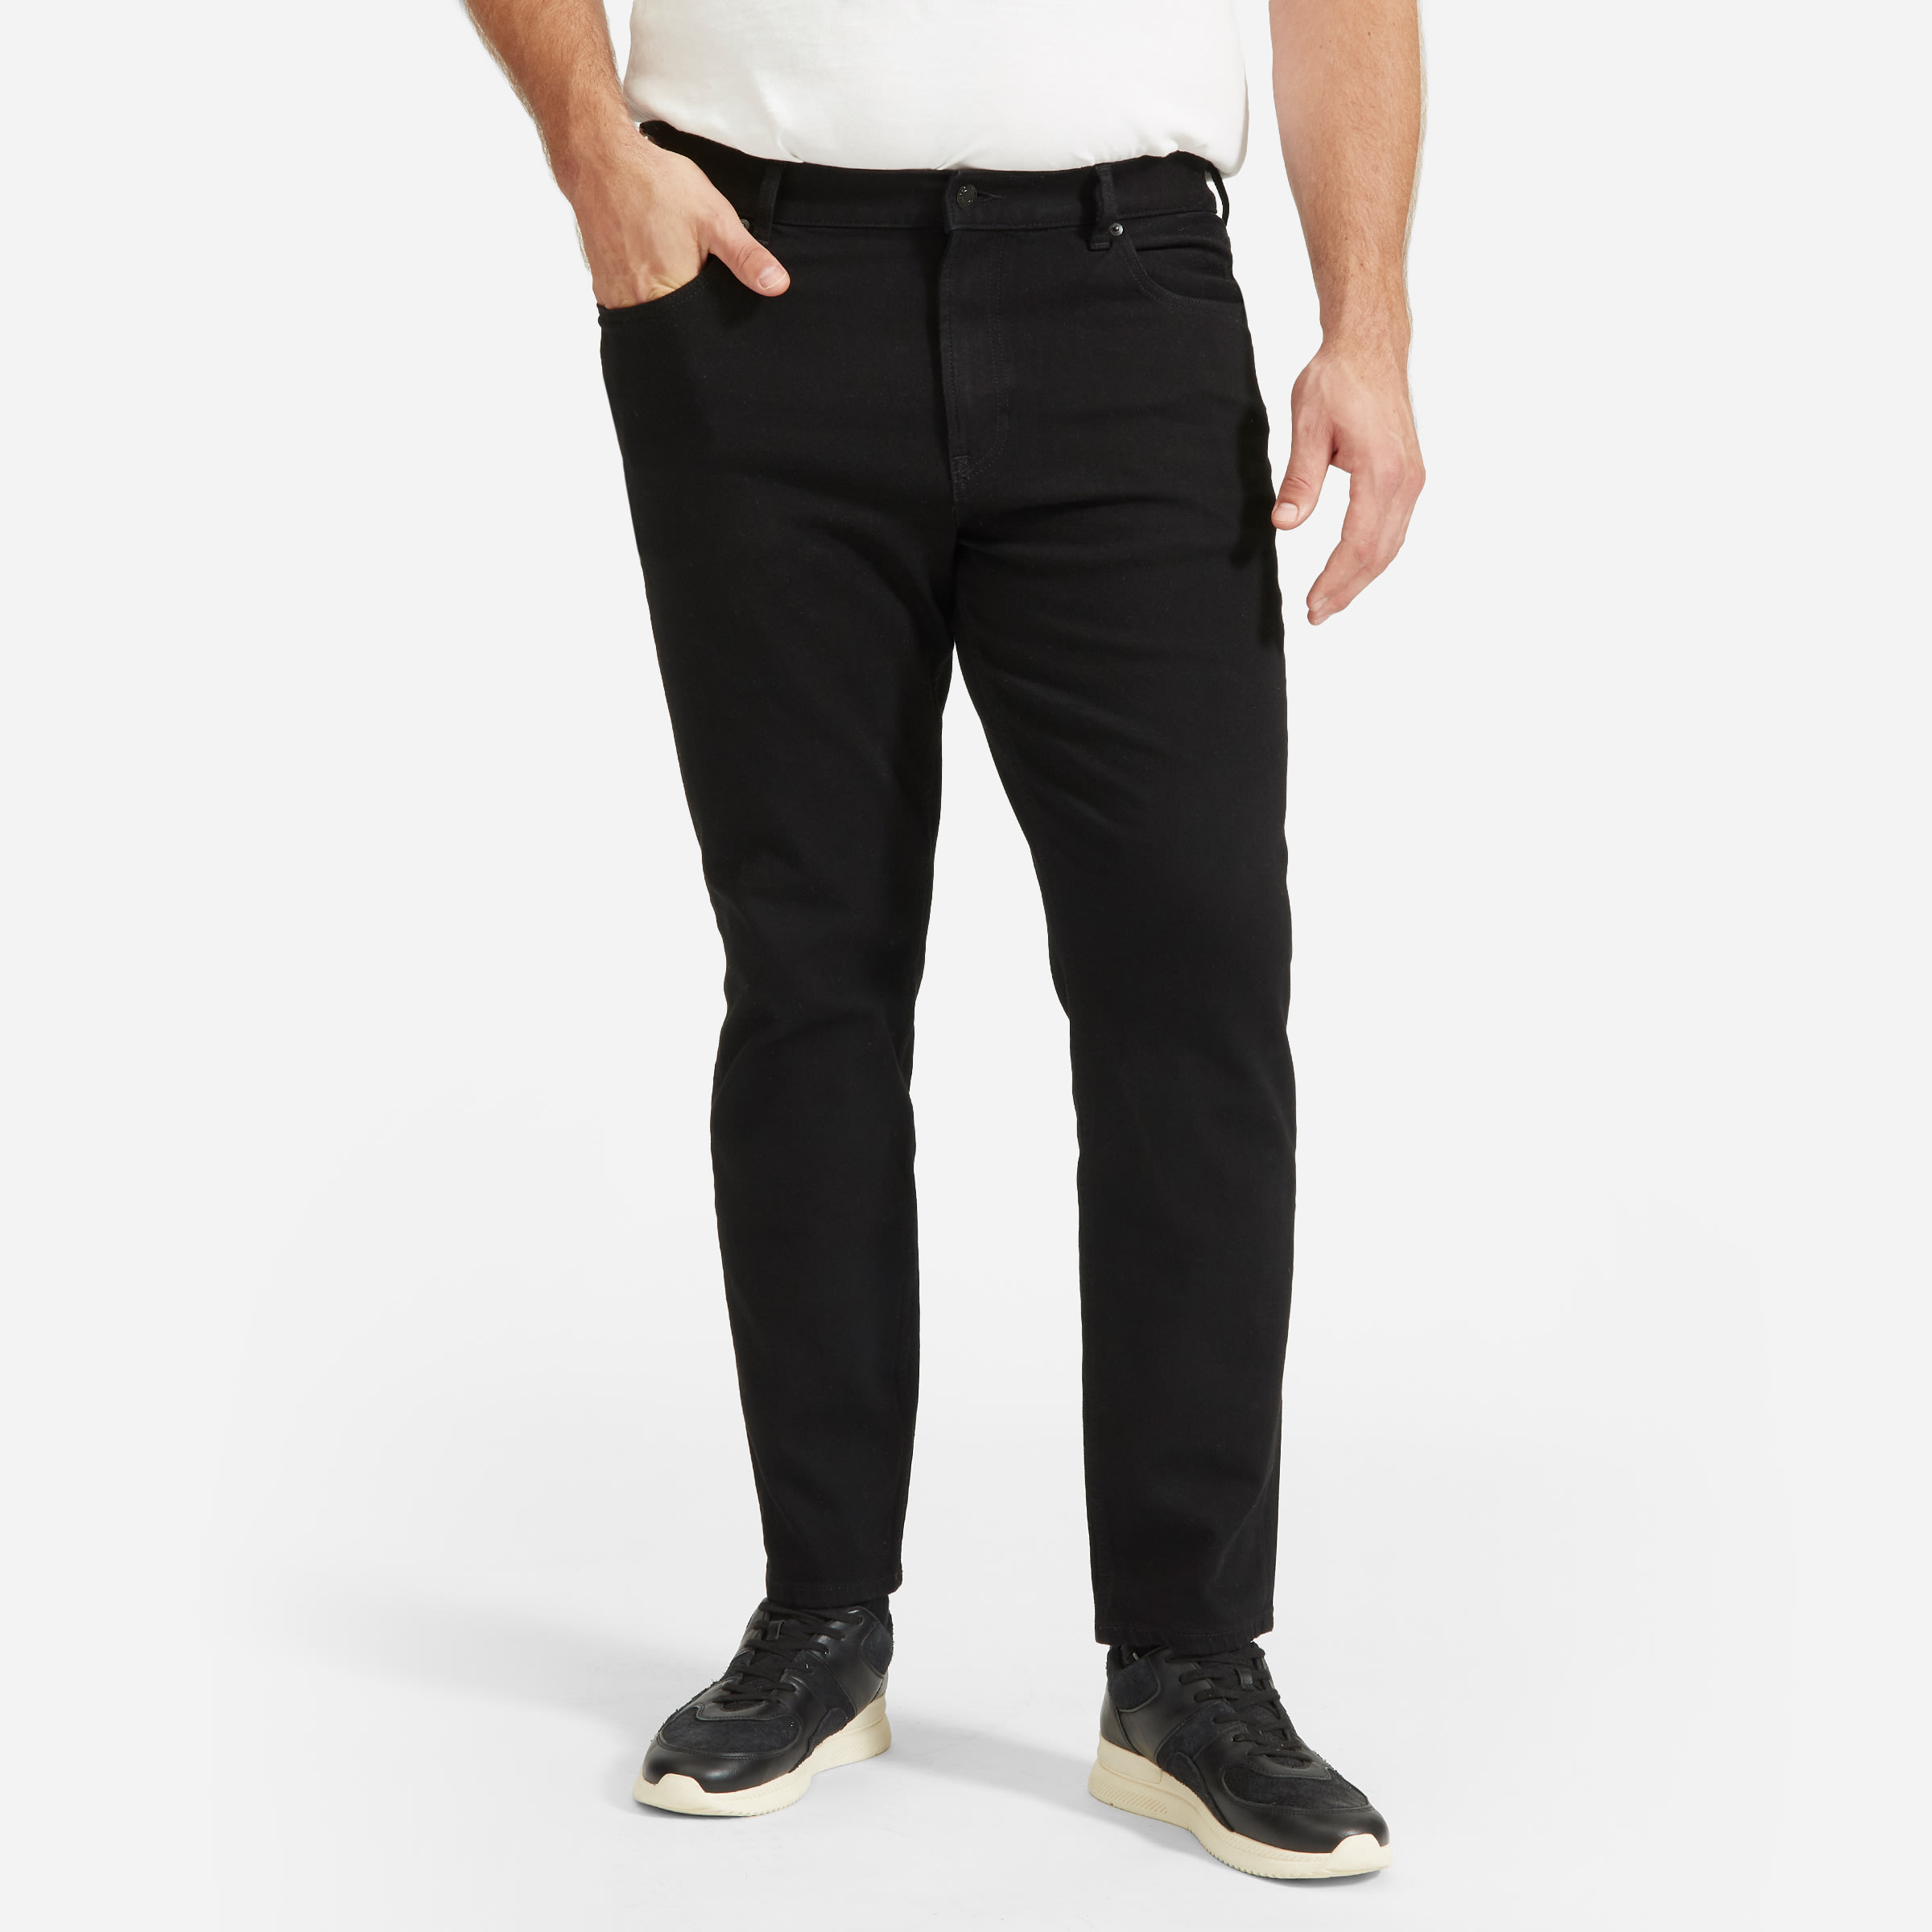 Everlane athletic fit jeans